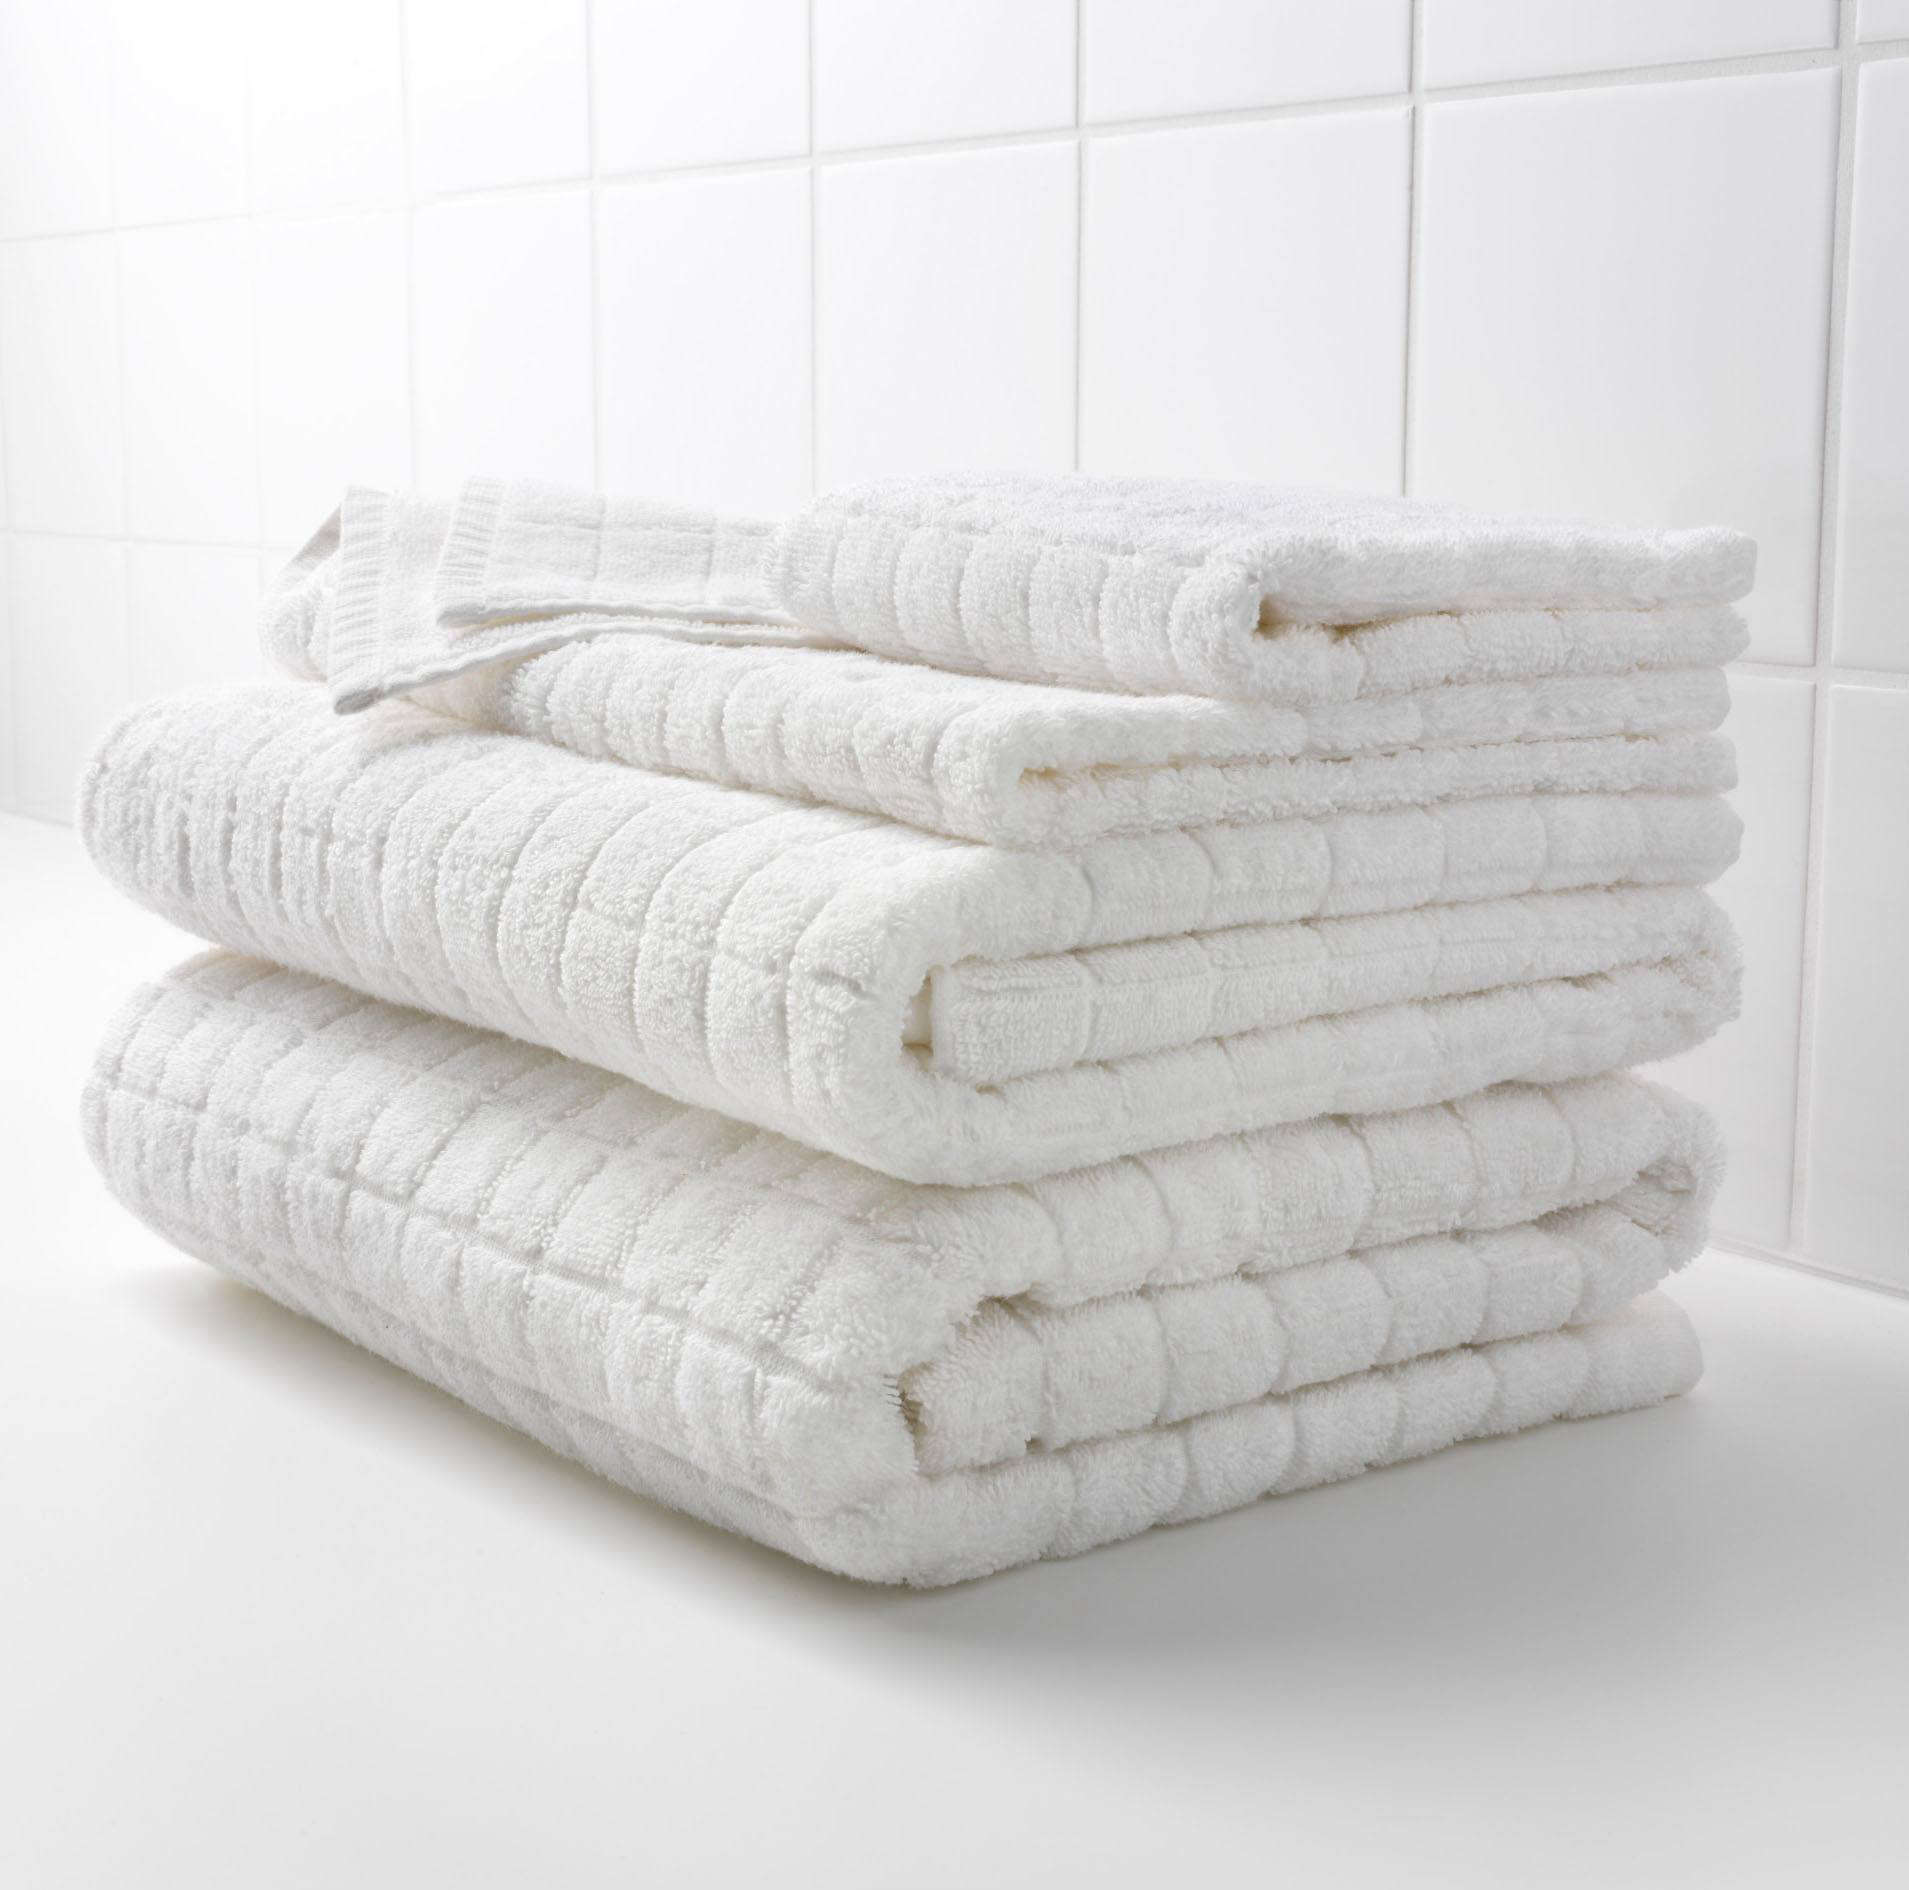 Bath Towels 101: What to Know Before You Buy